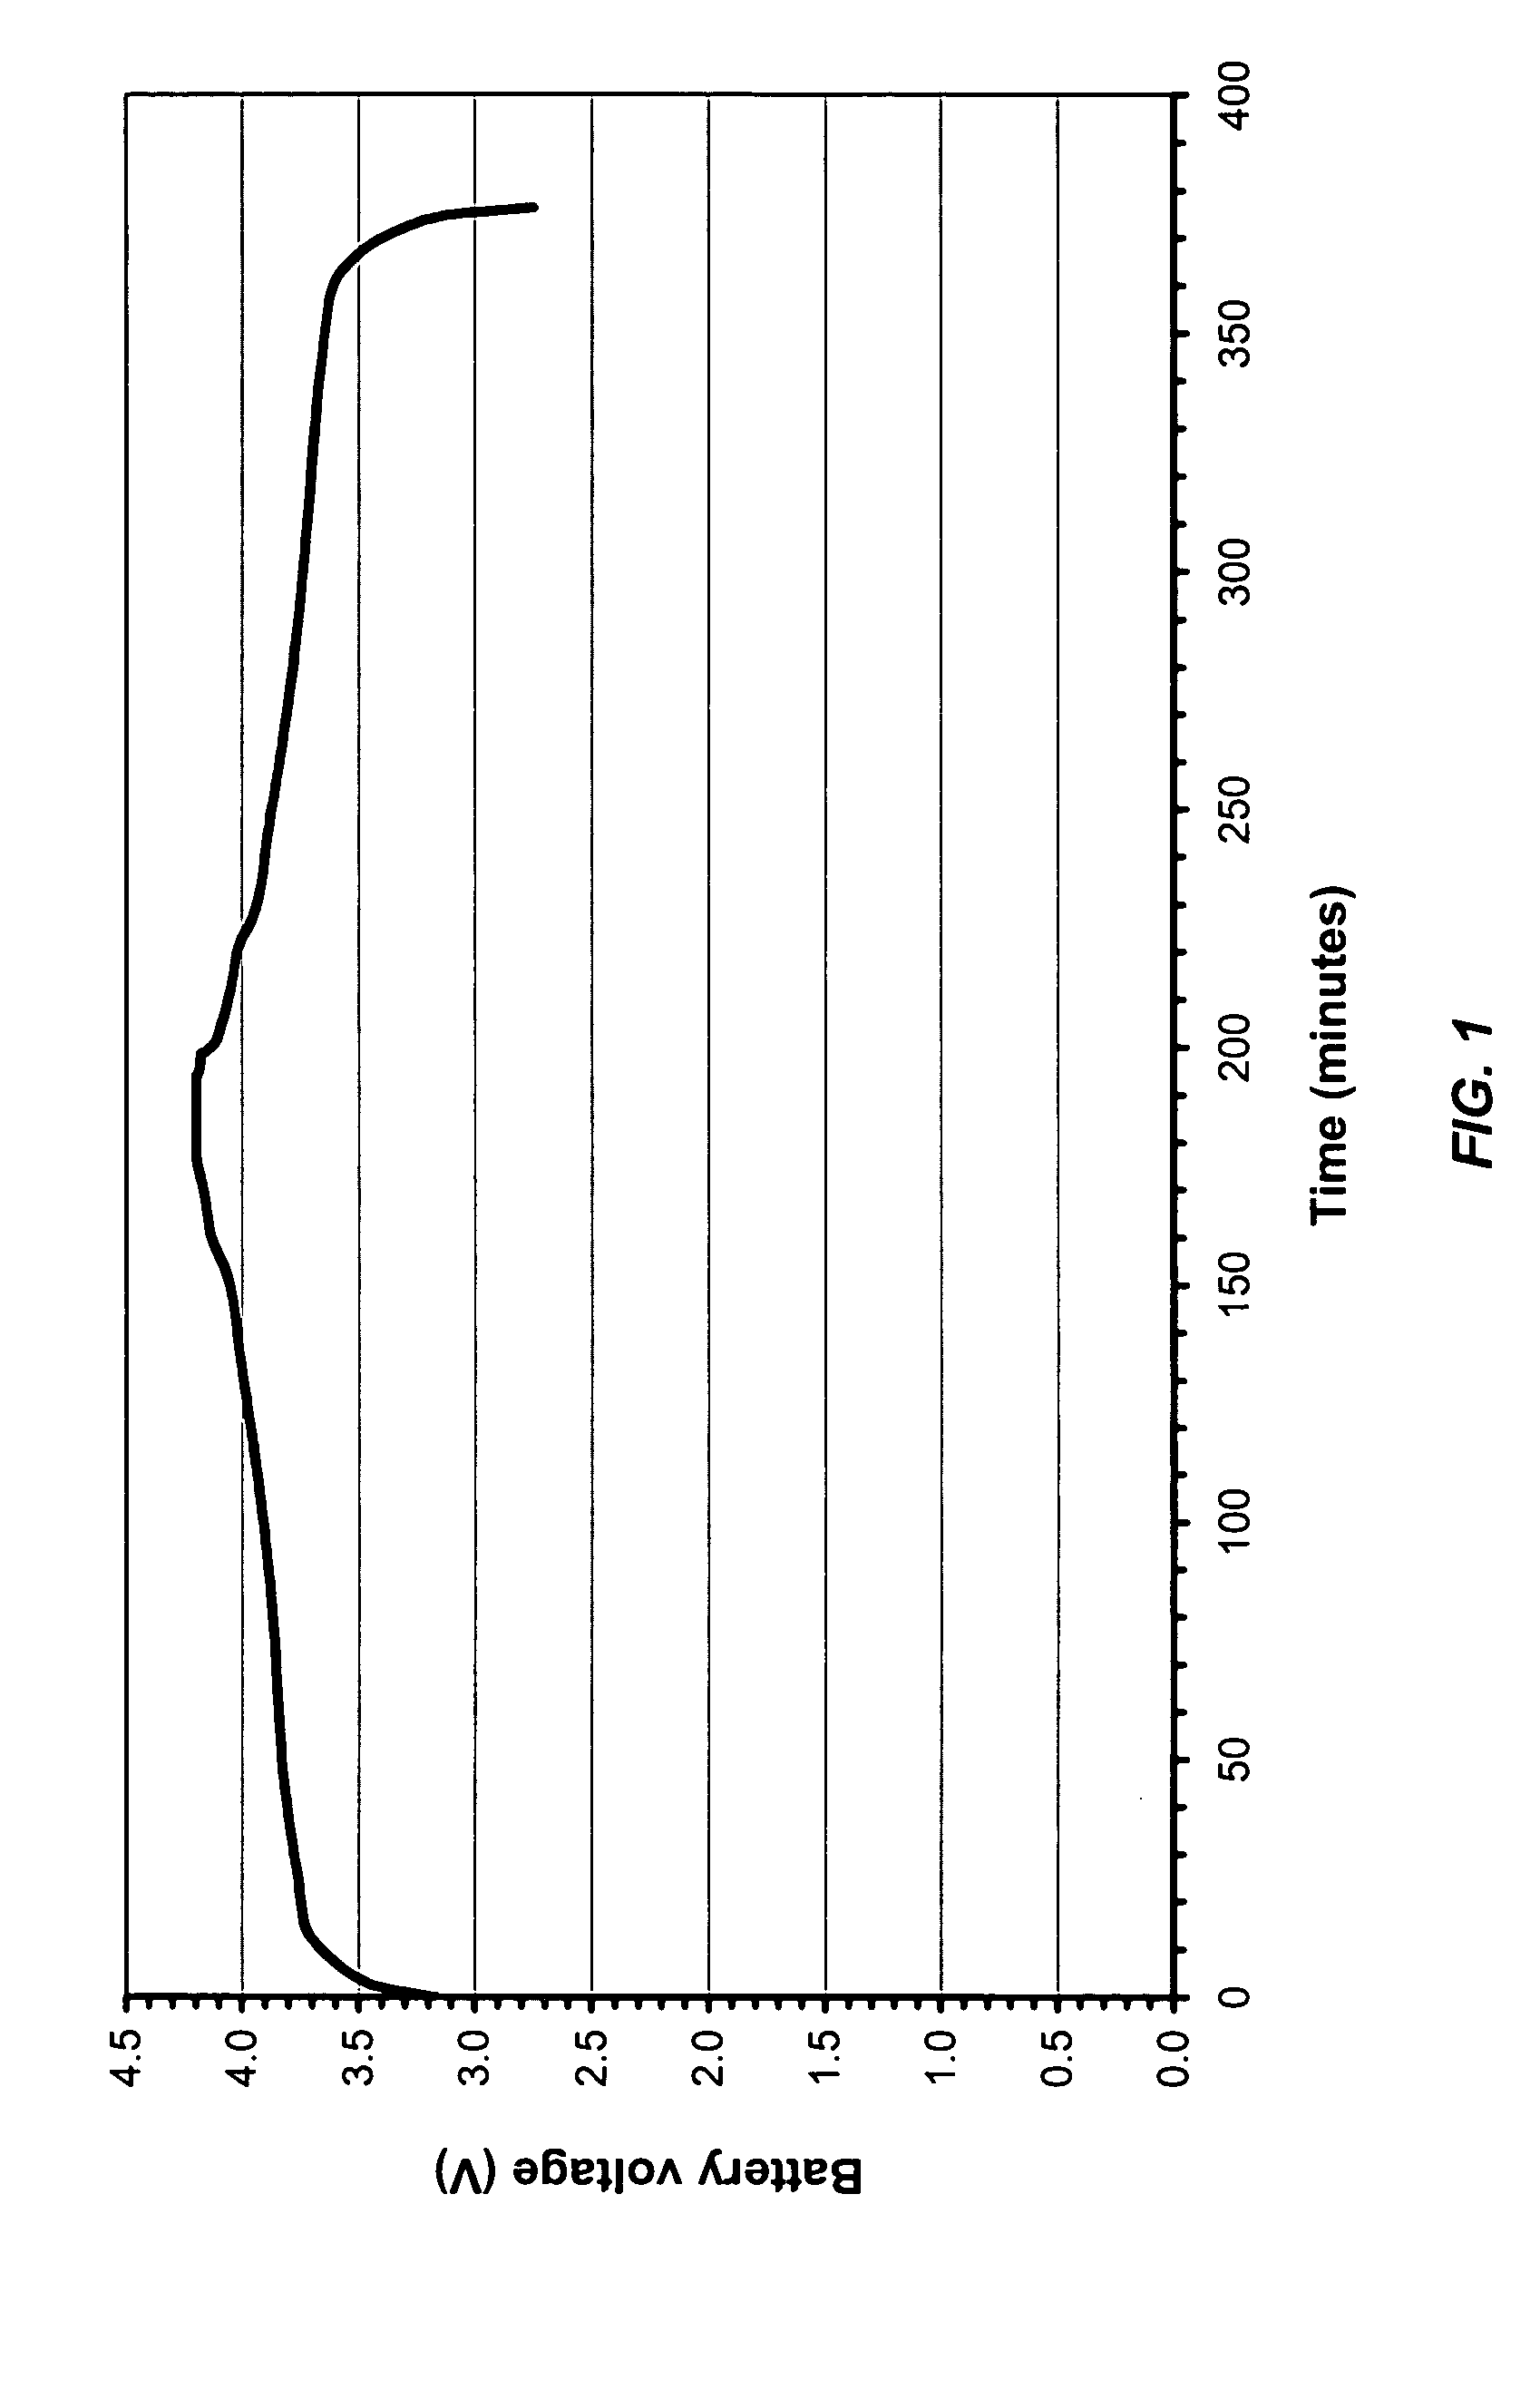 Non-aqueous electrolytes having an extended temperature range for battery applications